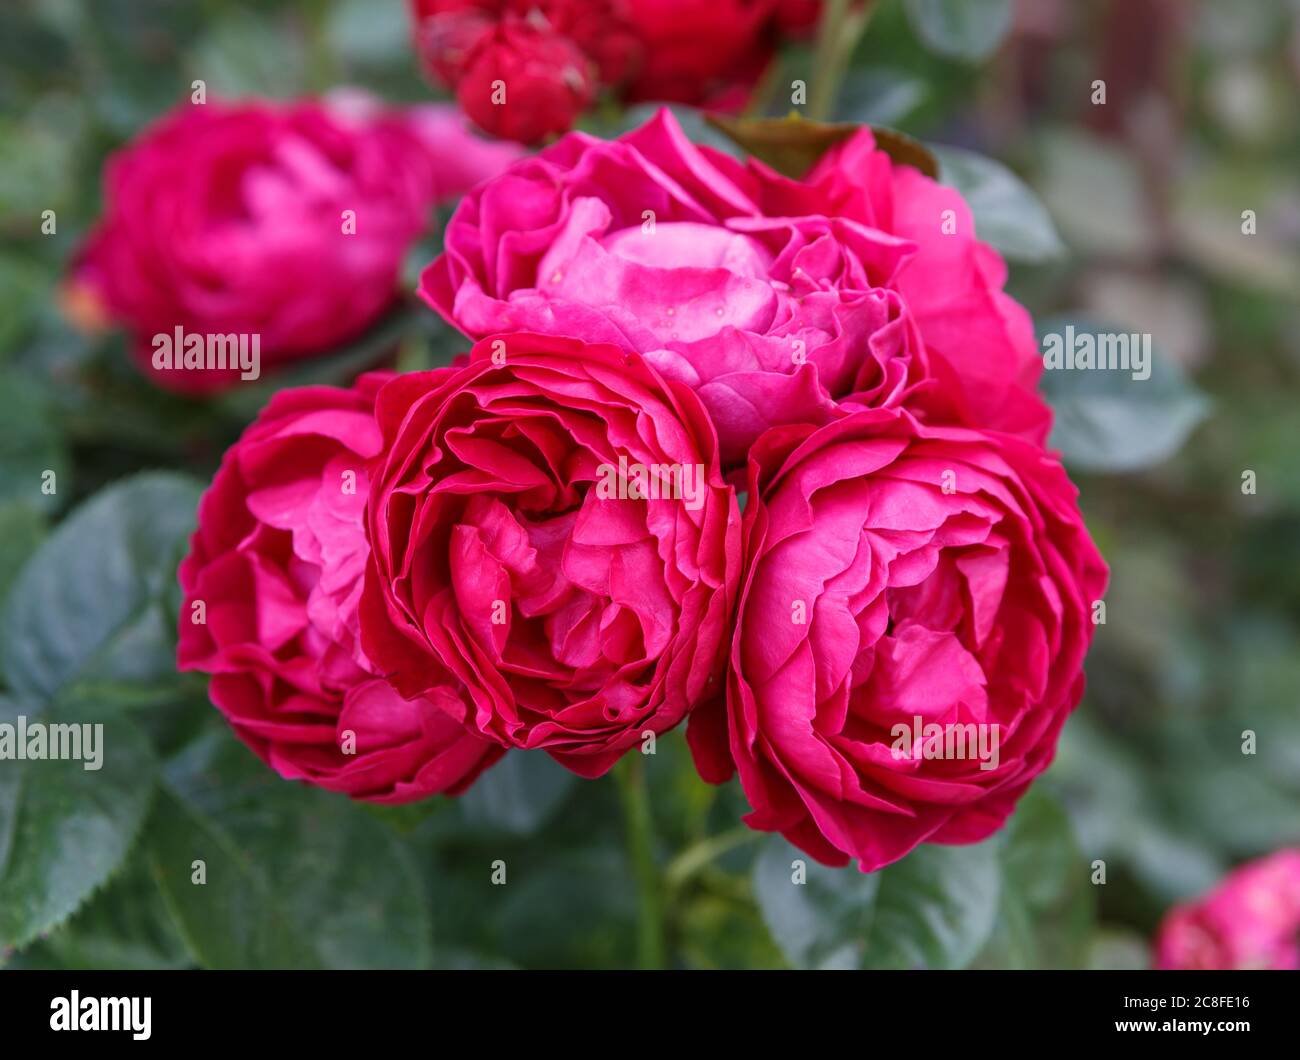 Blooming rose in the garden on a sunny day. Rose Ascot Stock Photo - Alamy